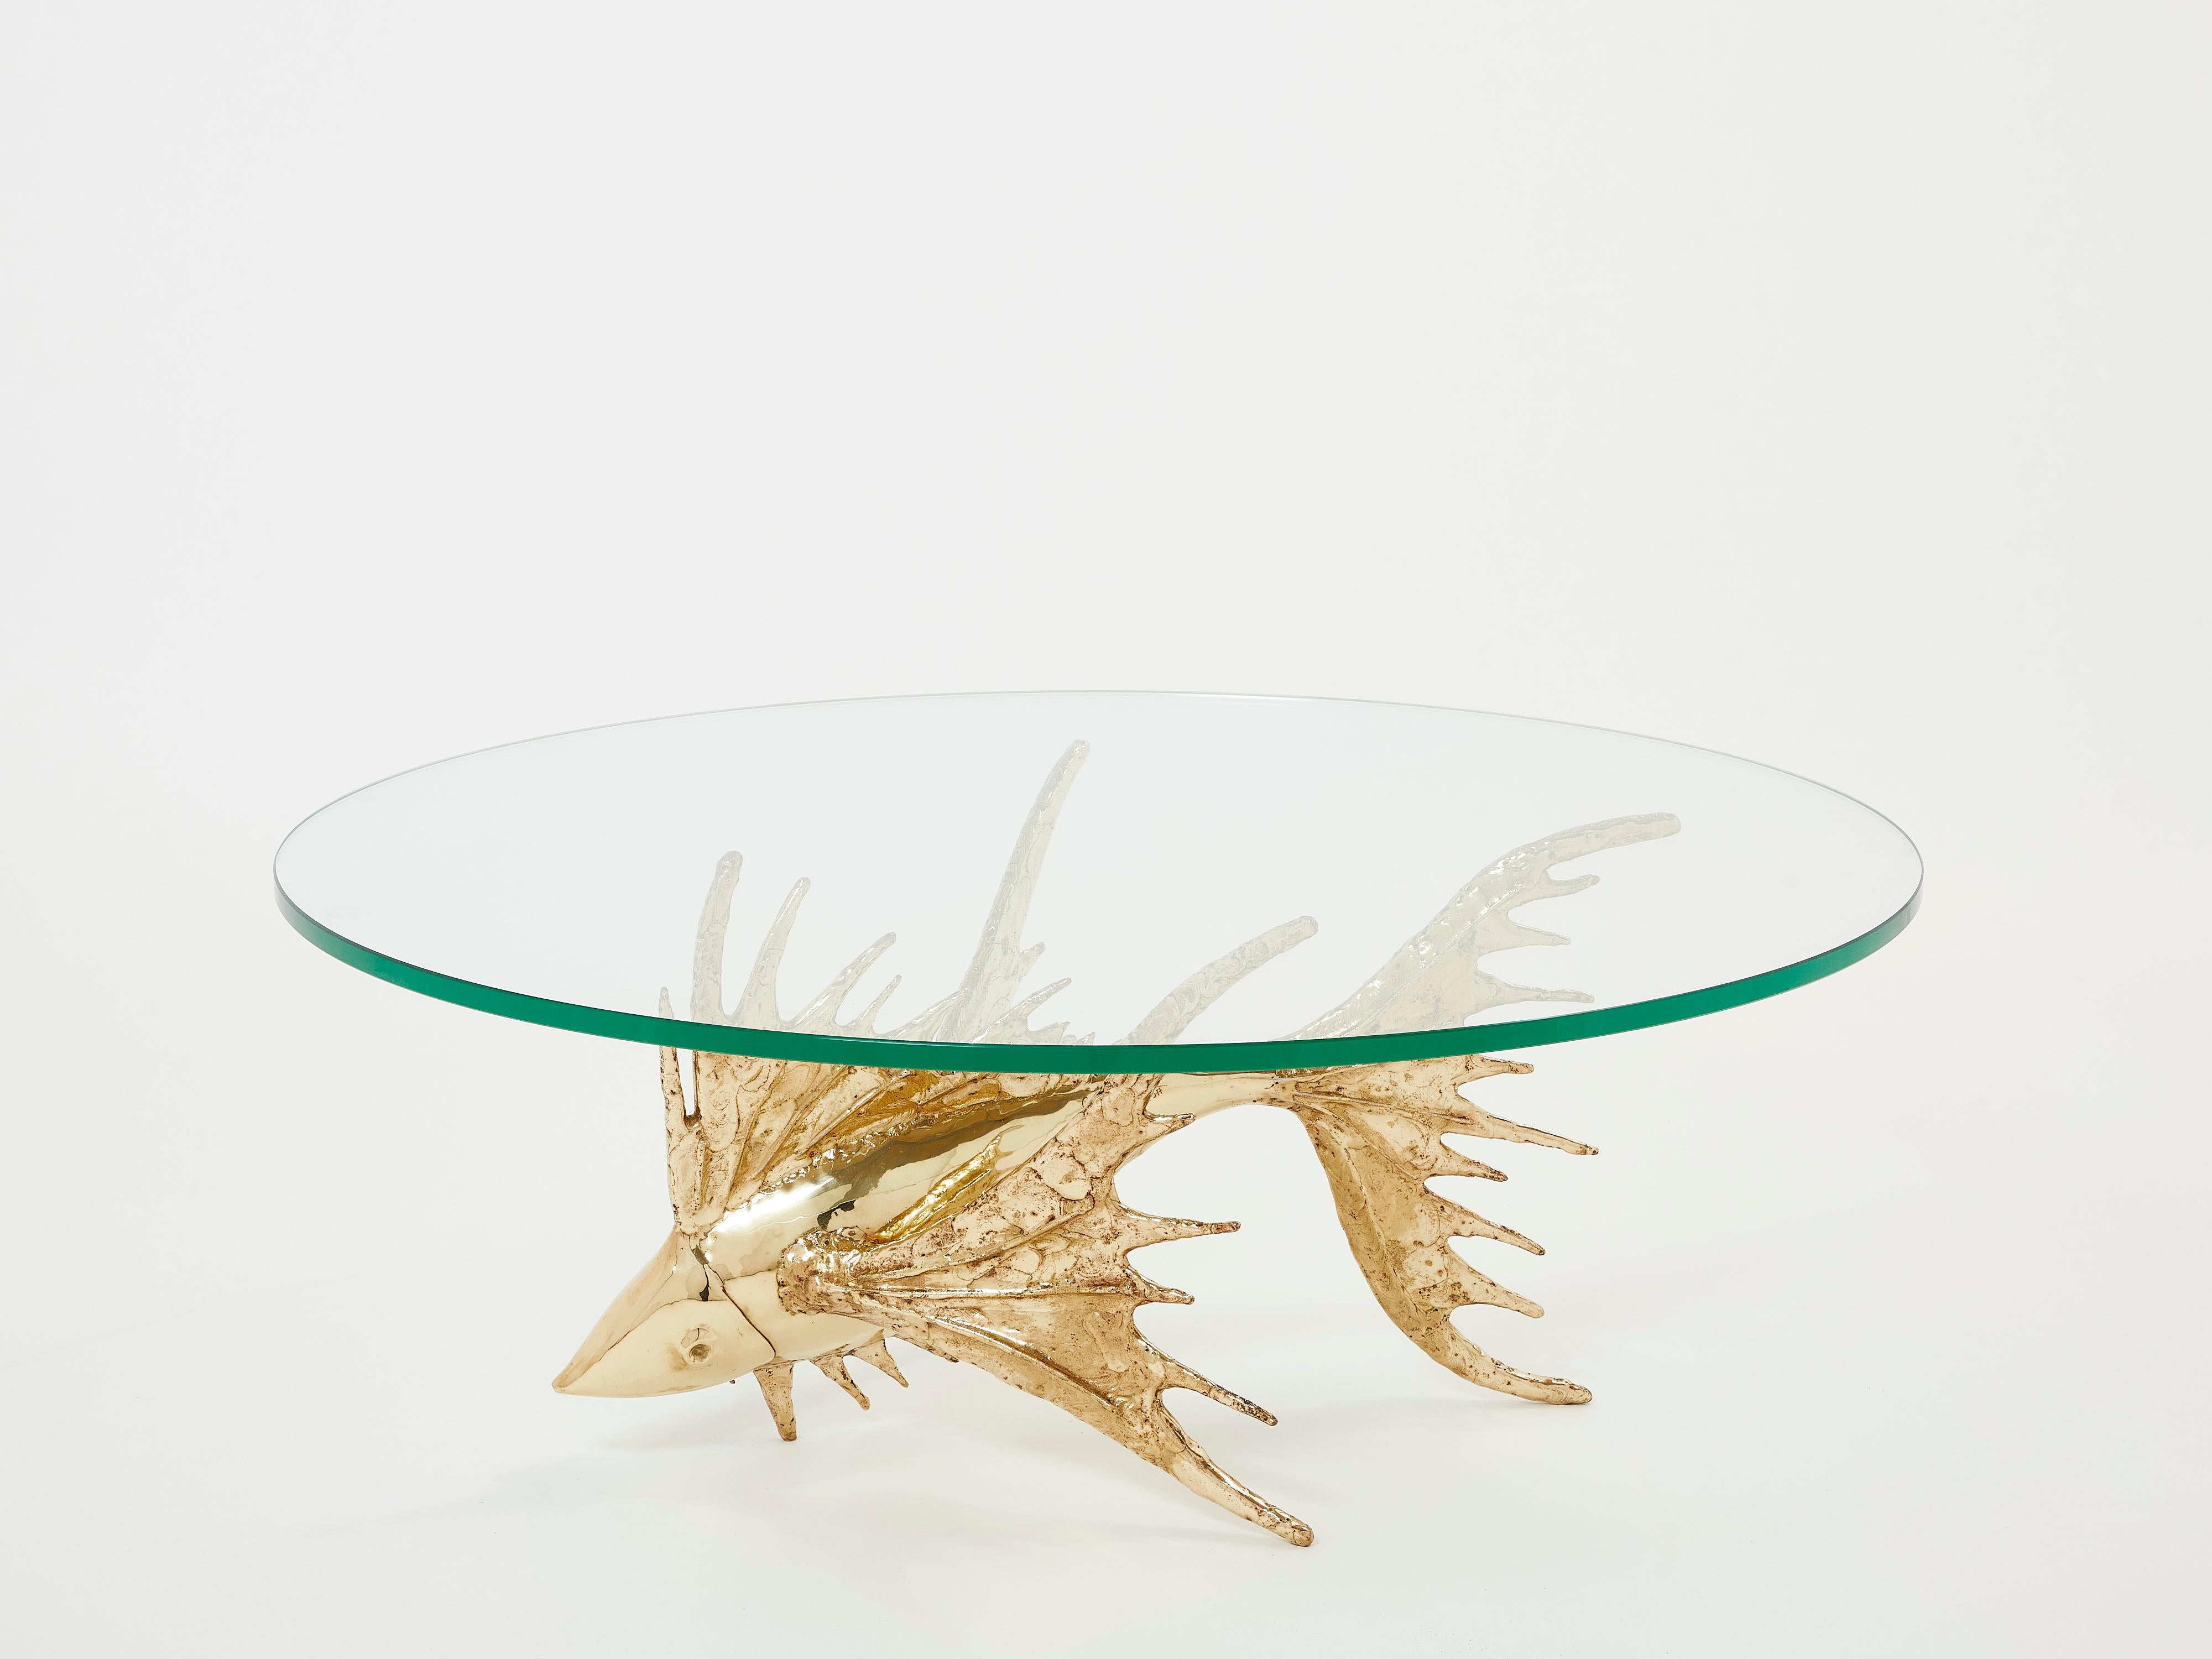 This unique fish sculpture coffee table signed by Alain Chervet is made of solid gilded brass, and dated 1977. It features a round thick glass top. This sculptural piece of furniture is truly one of a kind. The rich patinated brass textures are